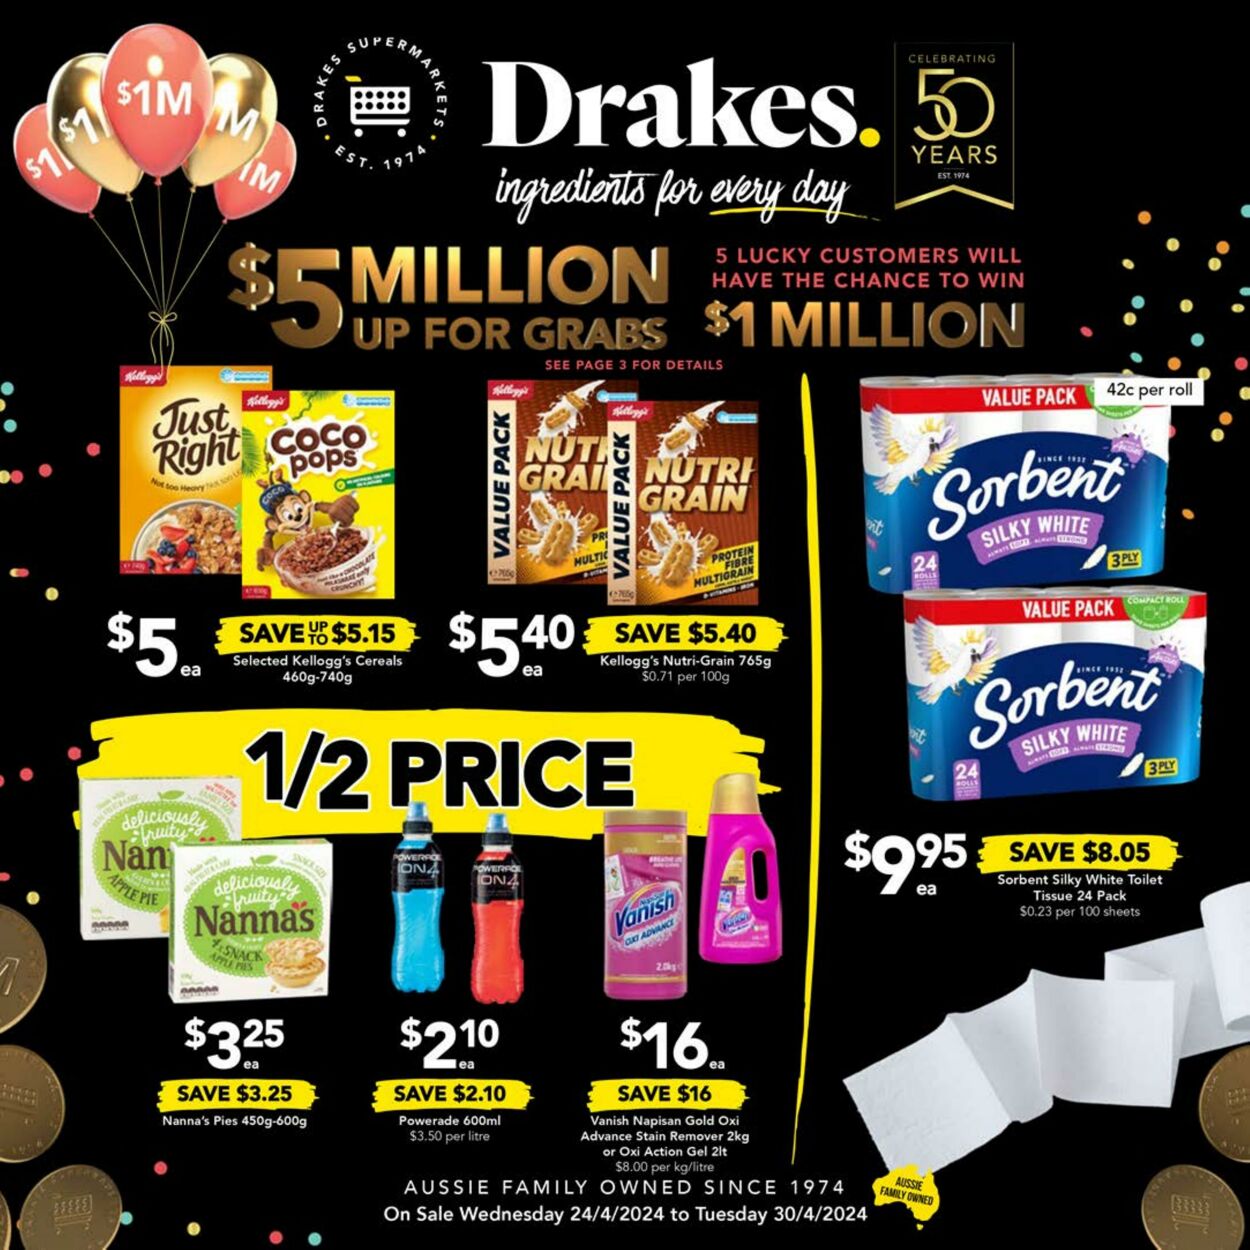 Drakes Supermarkets Promotional catalogues